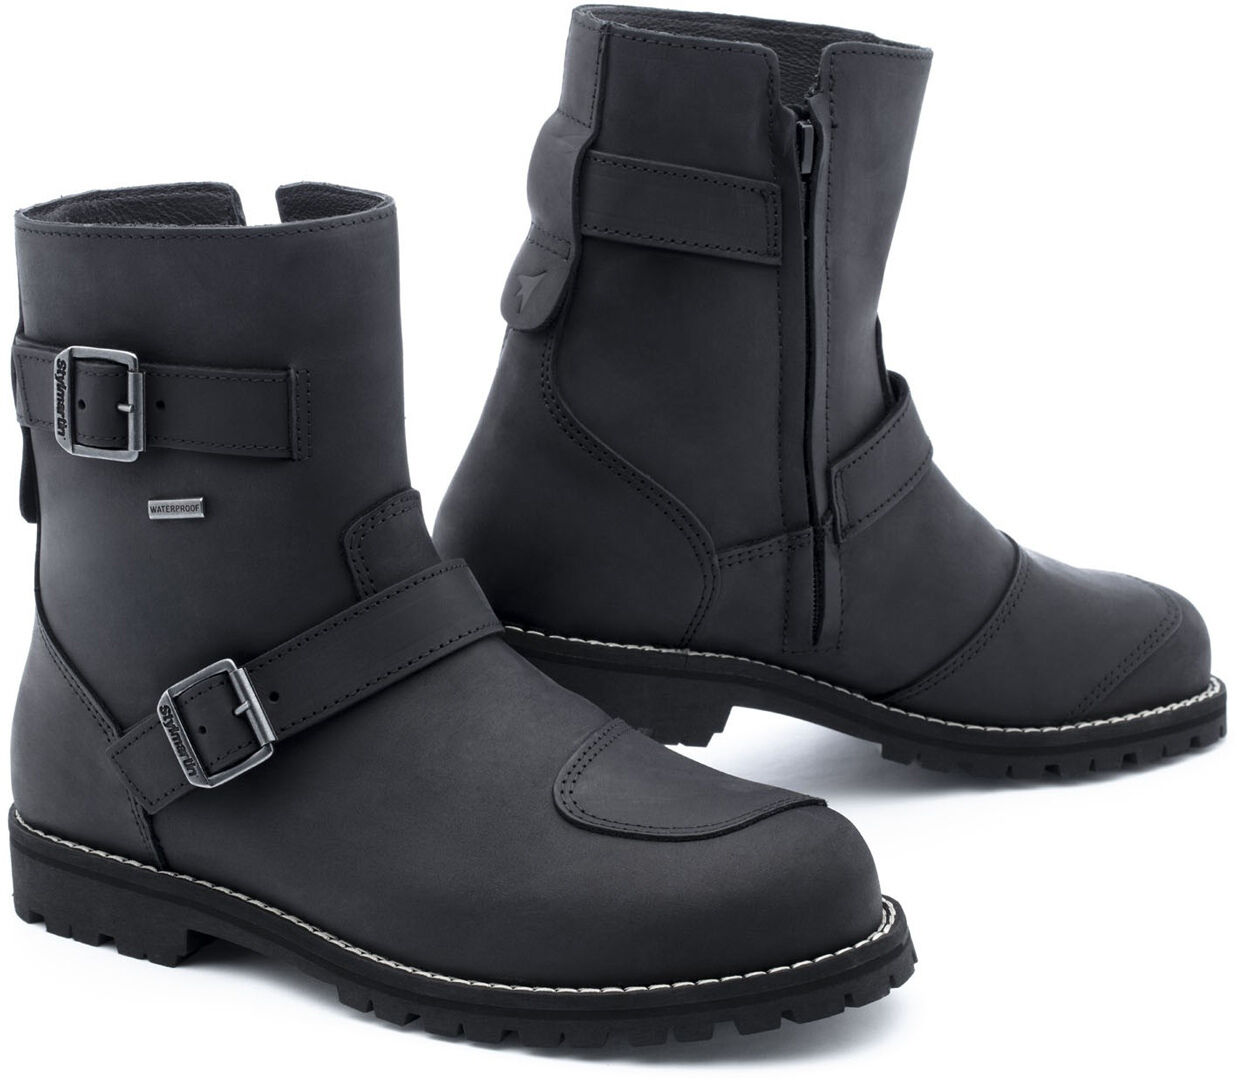 Stylmartin Legend Mid Wp Motorcycle Boots  - Black